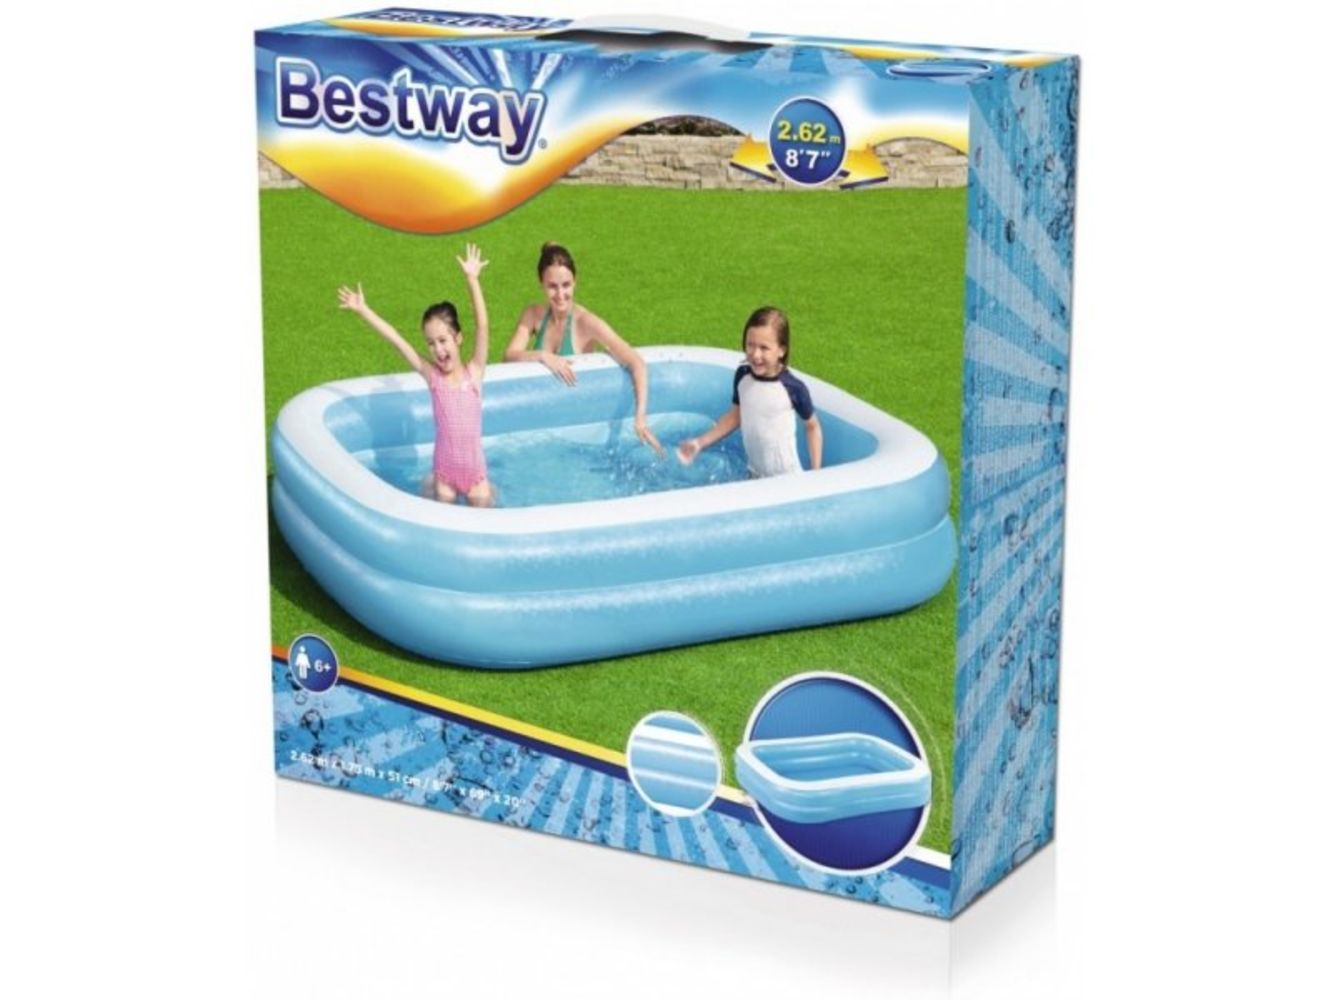 Brand New Bestway Pools Stock - Cancelled Order Direct Direct From Distributor - Over 4000 pcs Available!!